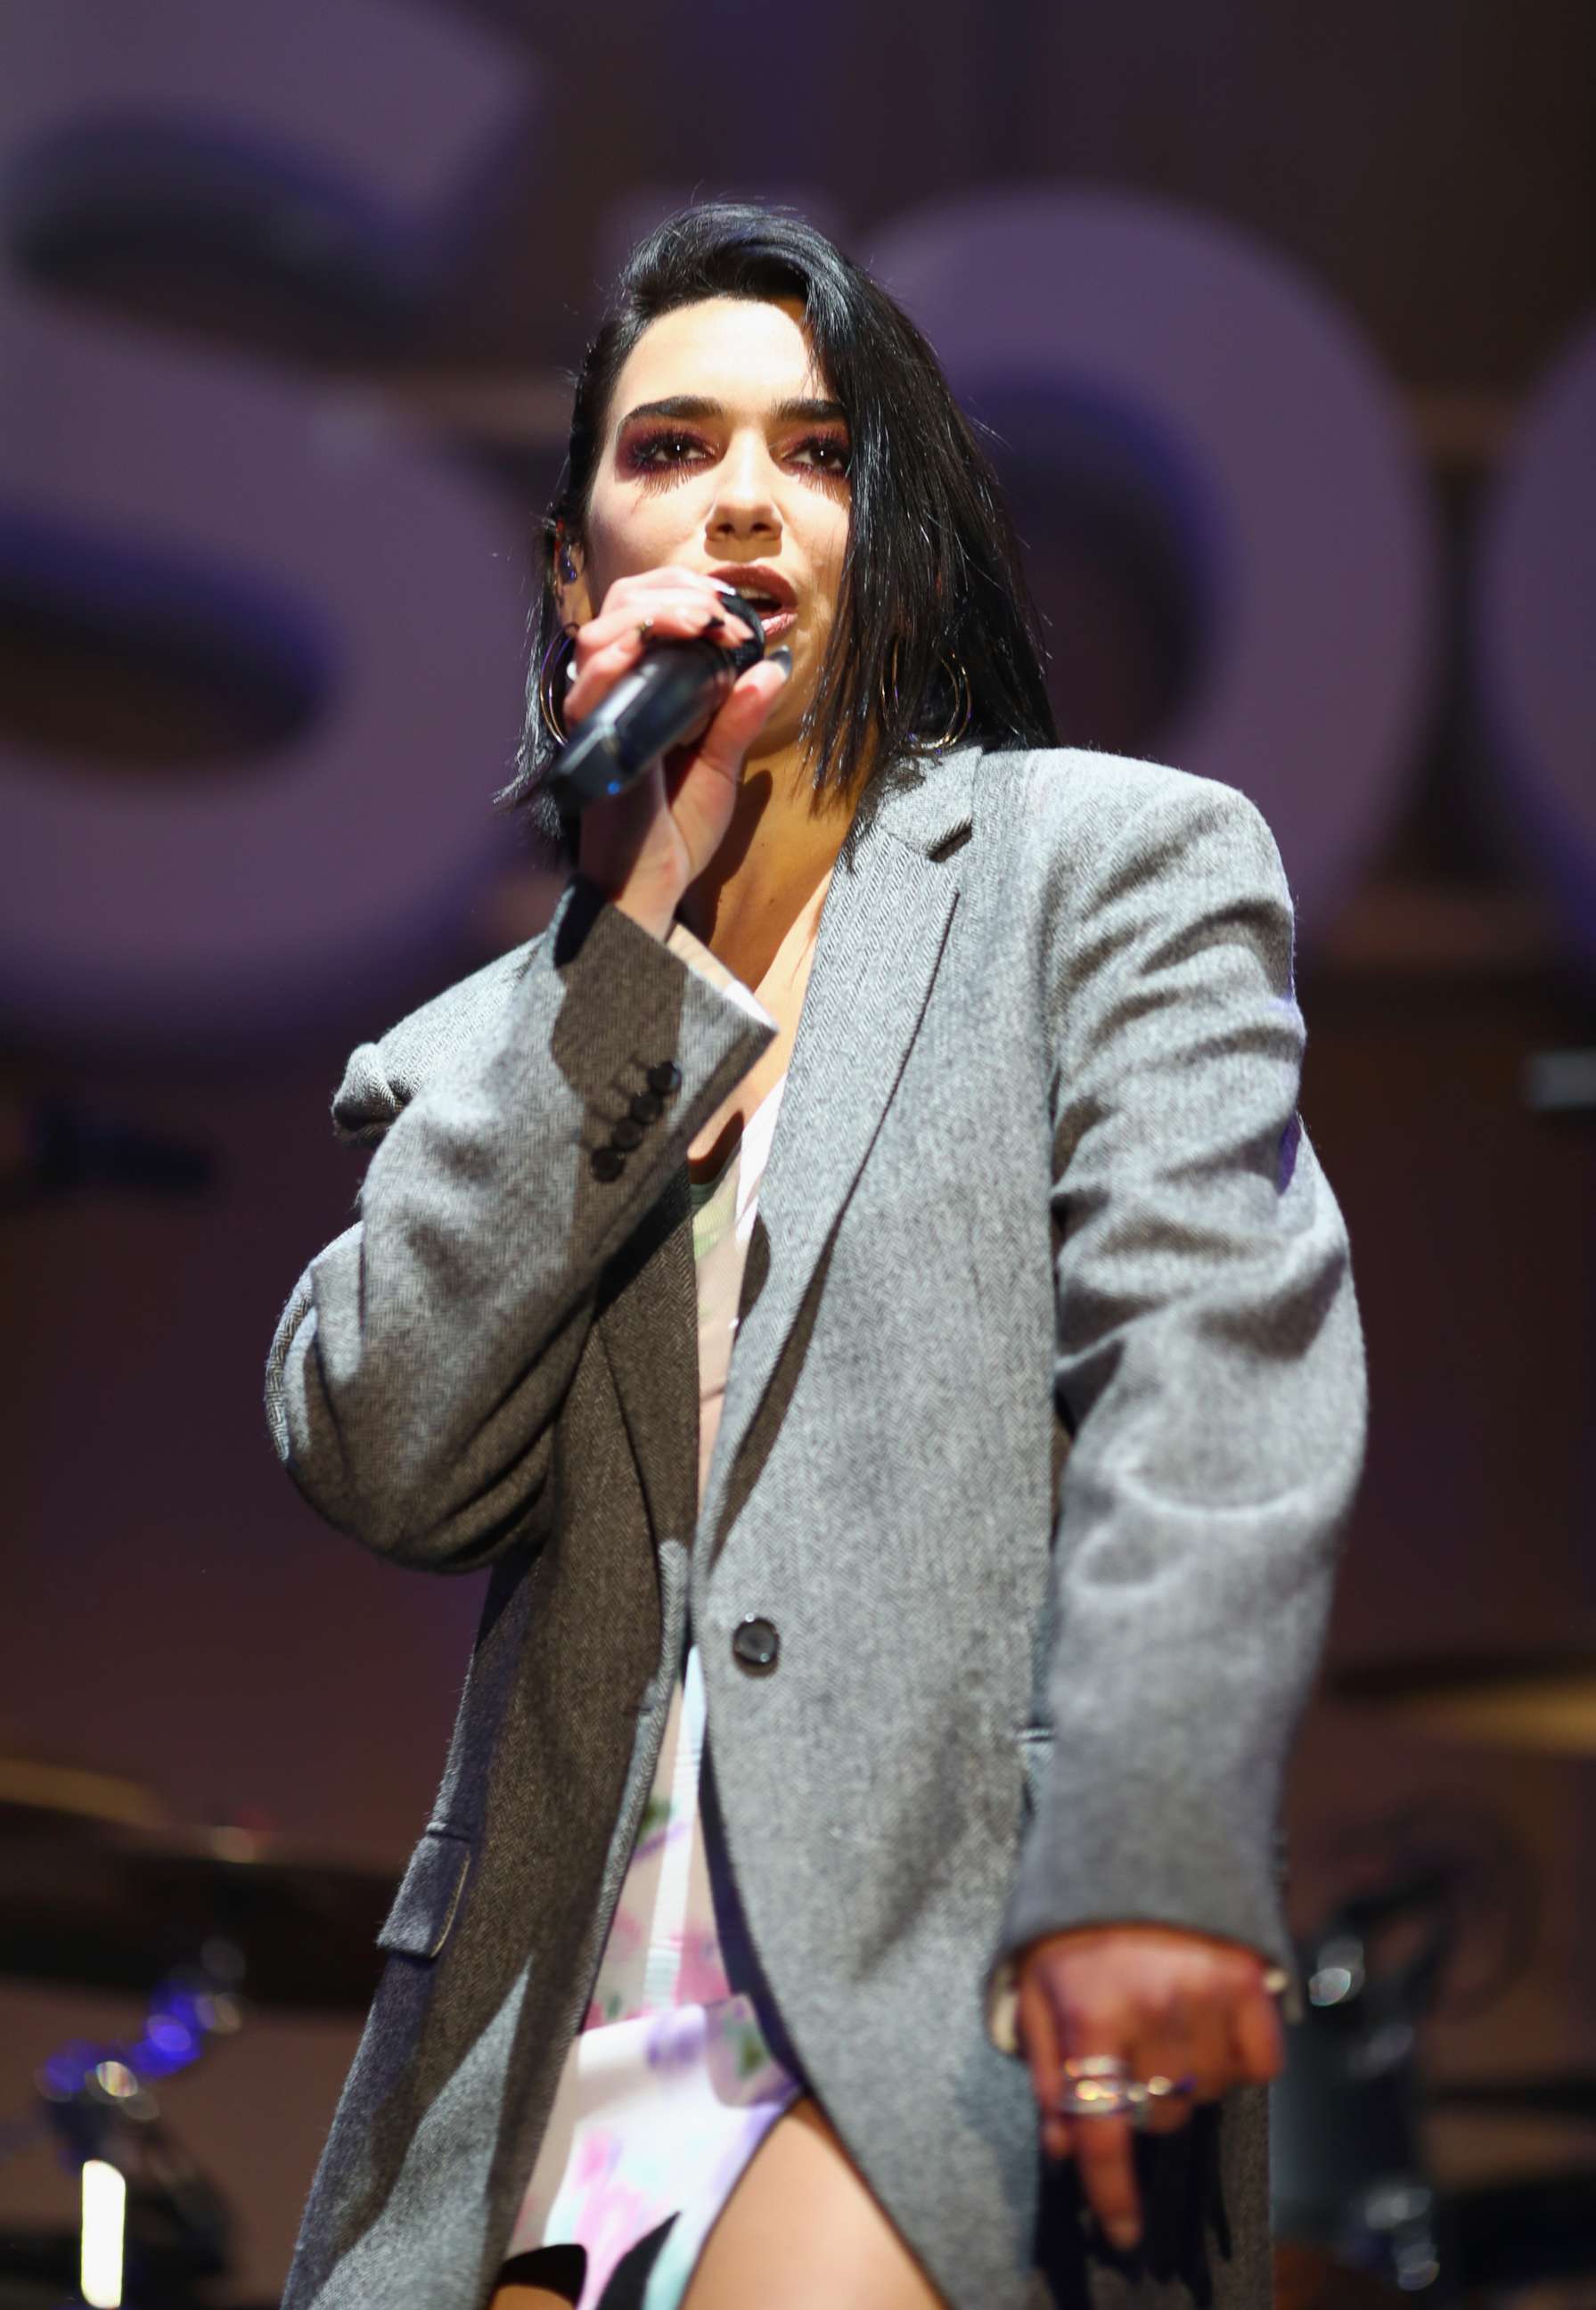 PHOTO: Dua Lipa performs onstage during the Spotify "Best New Artist 2019" party, Feb. 7, 2019, in Los Angeles.